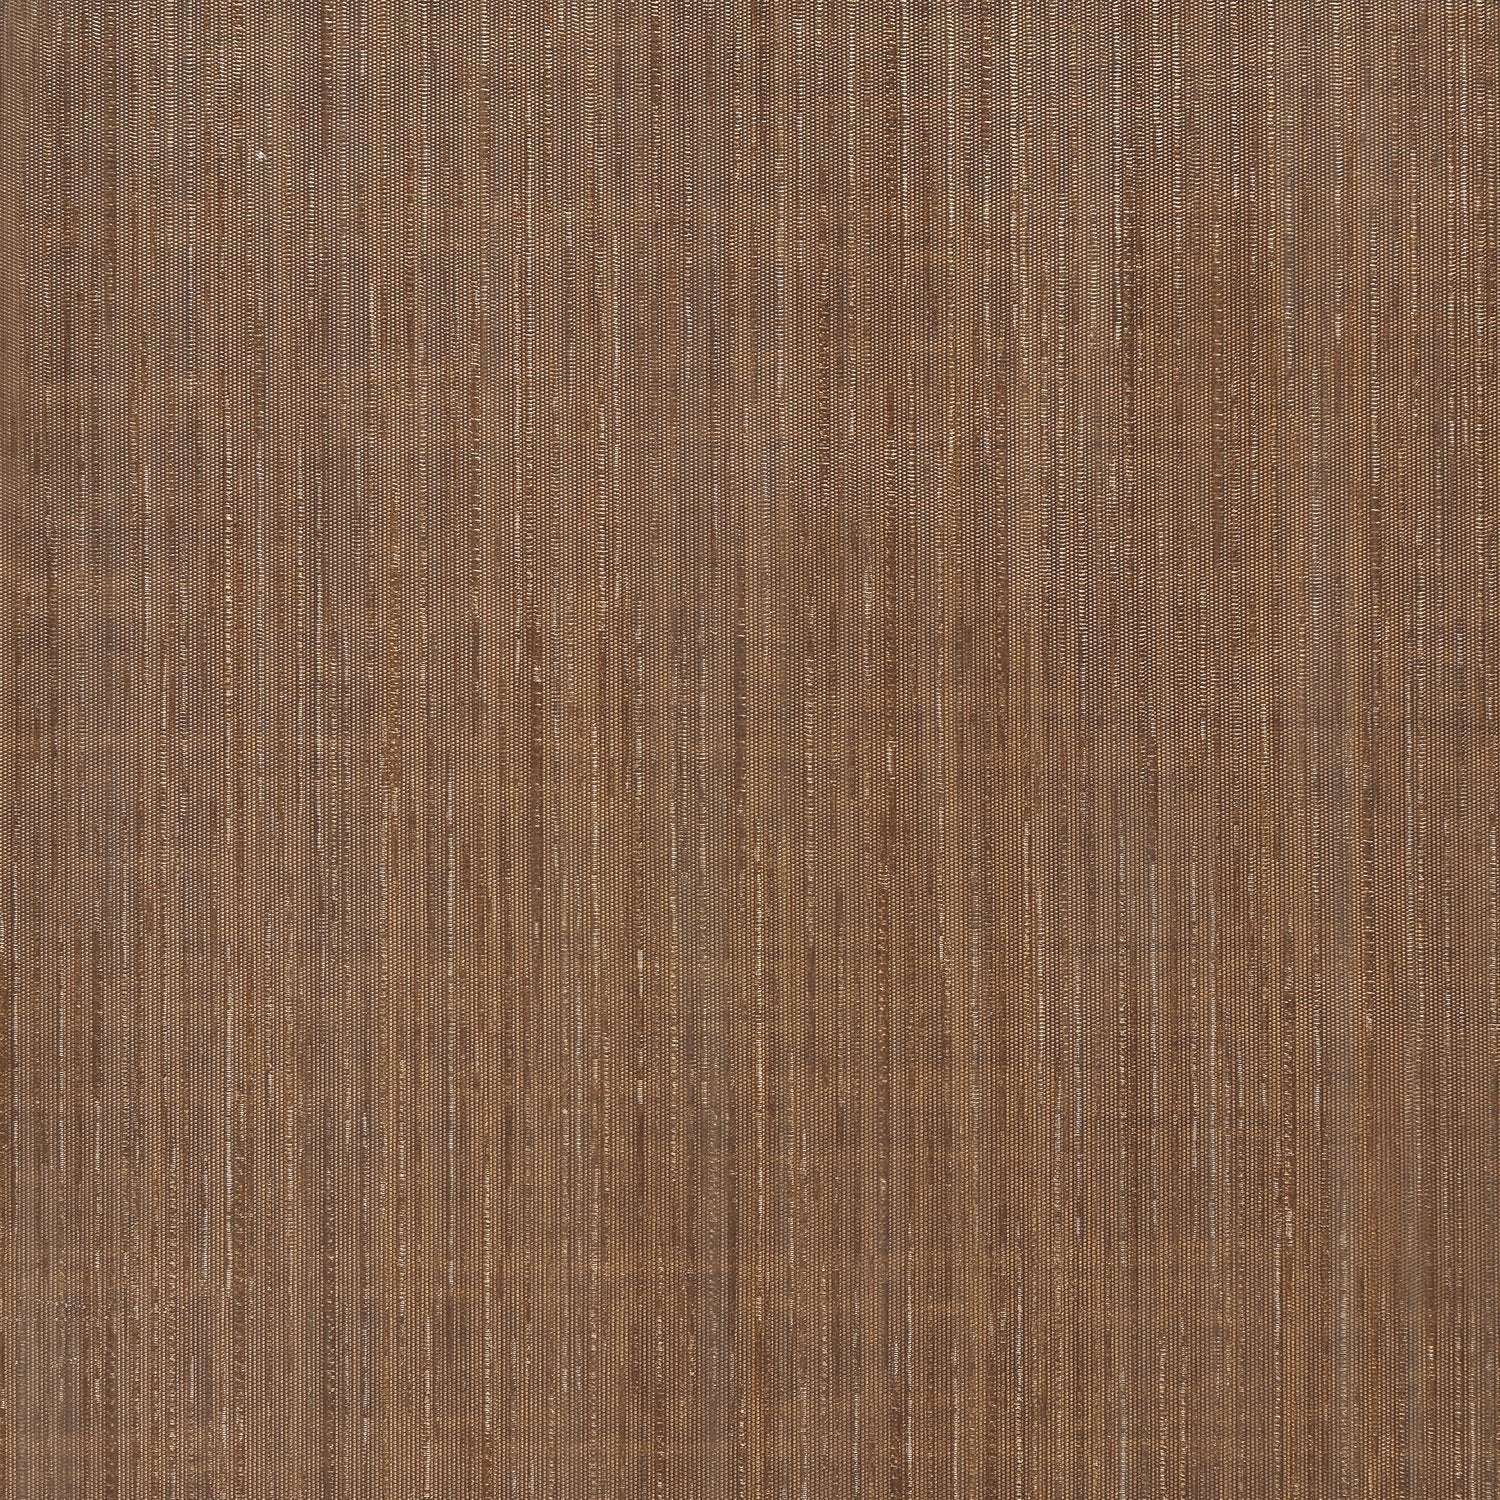 Skyward - Y47389 - Wallcovering - Vycon - Kube Contract